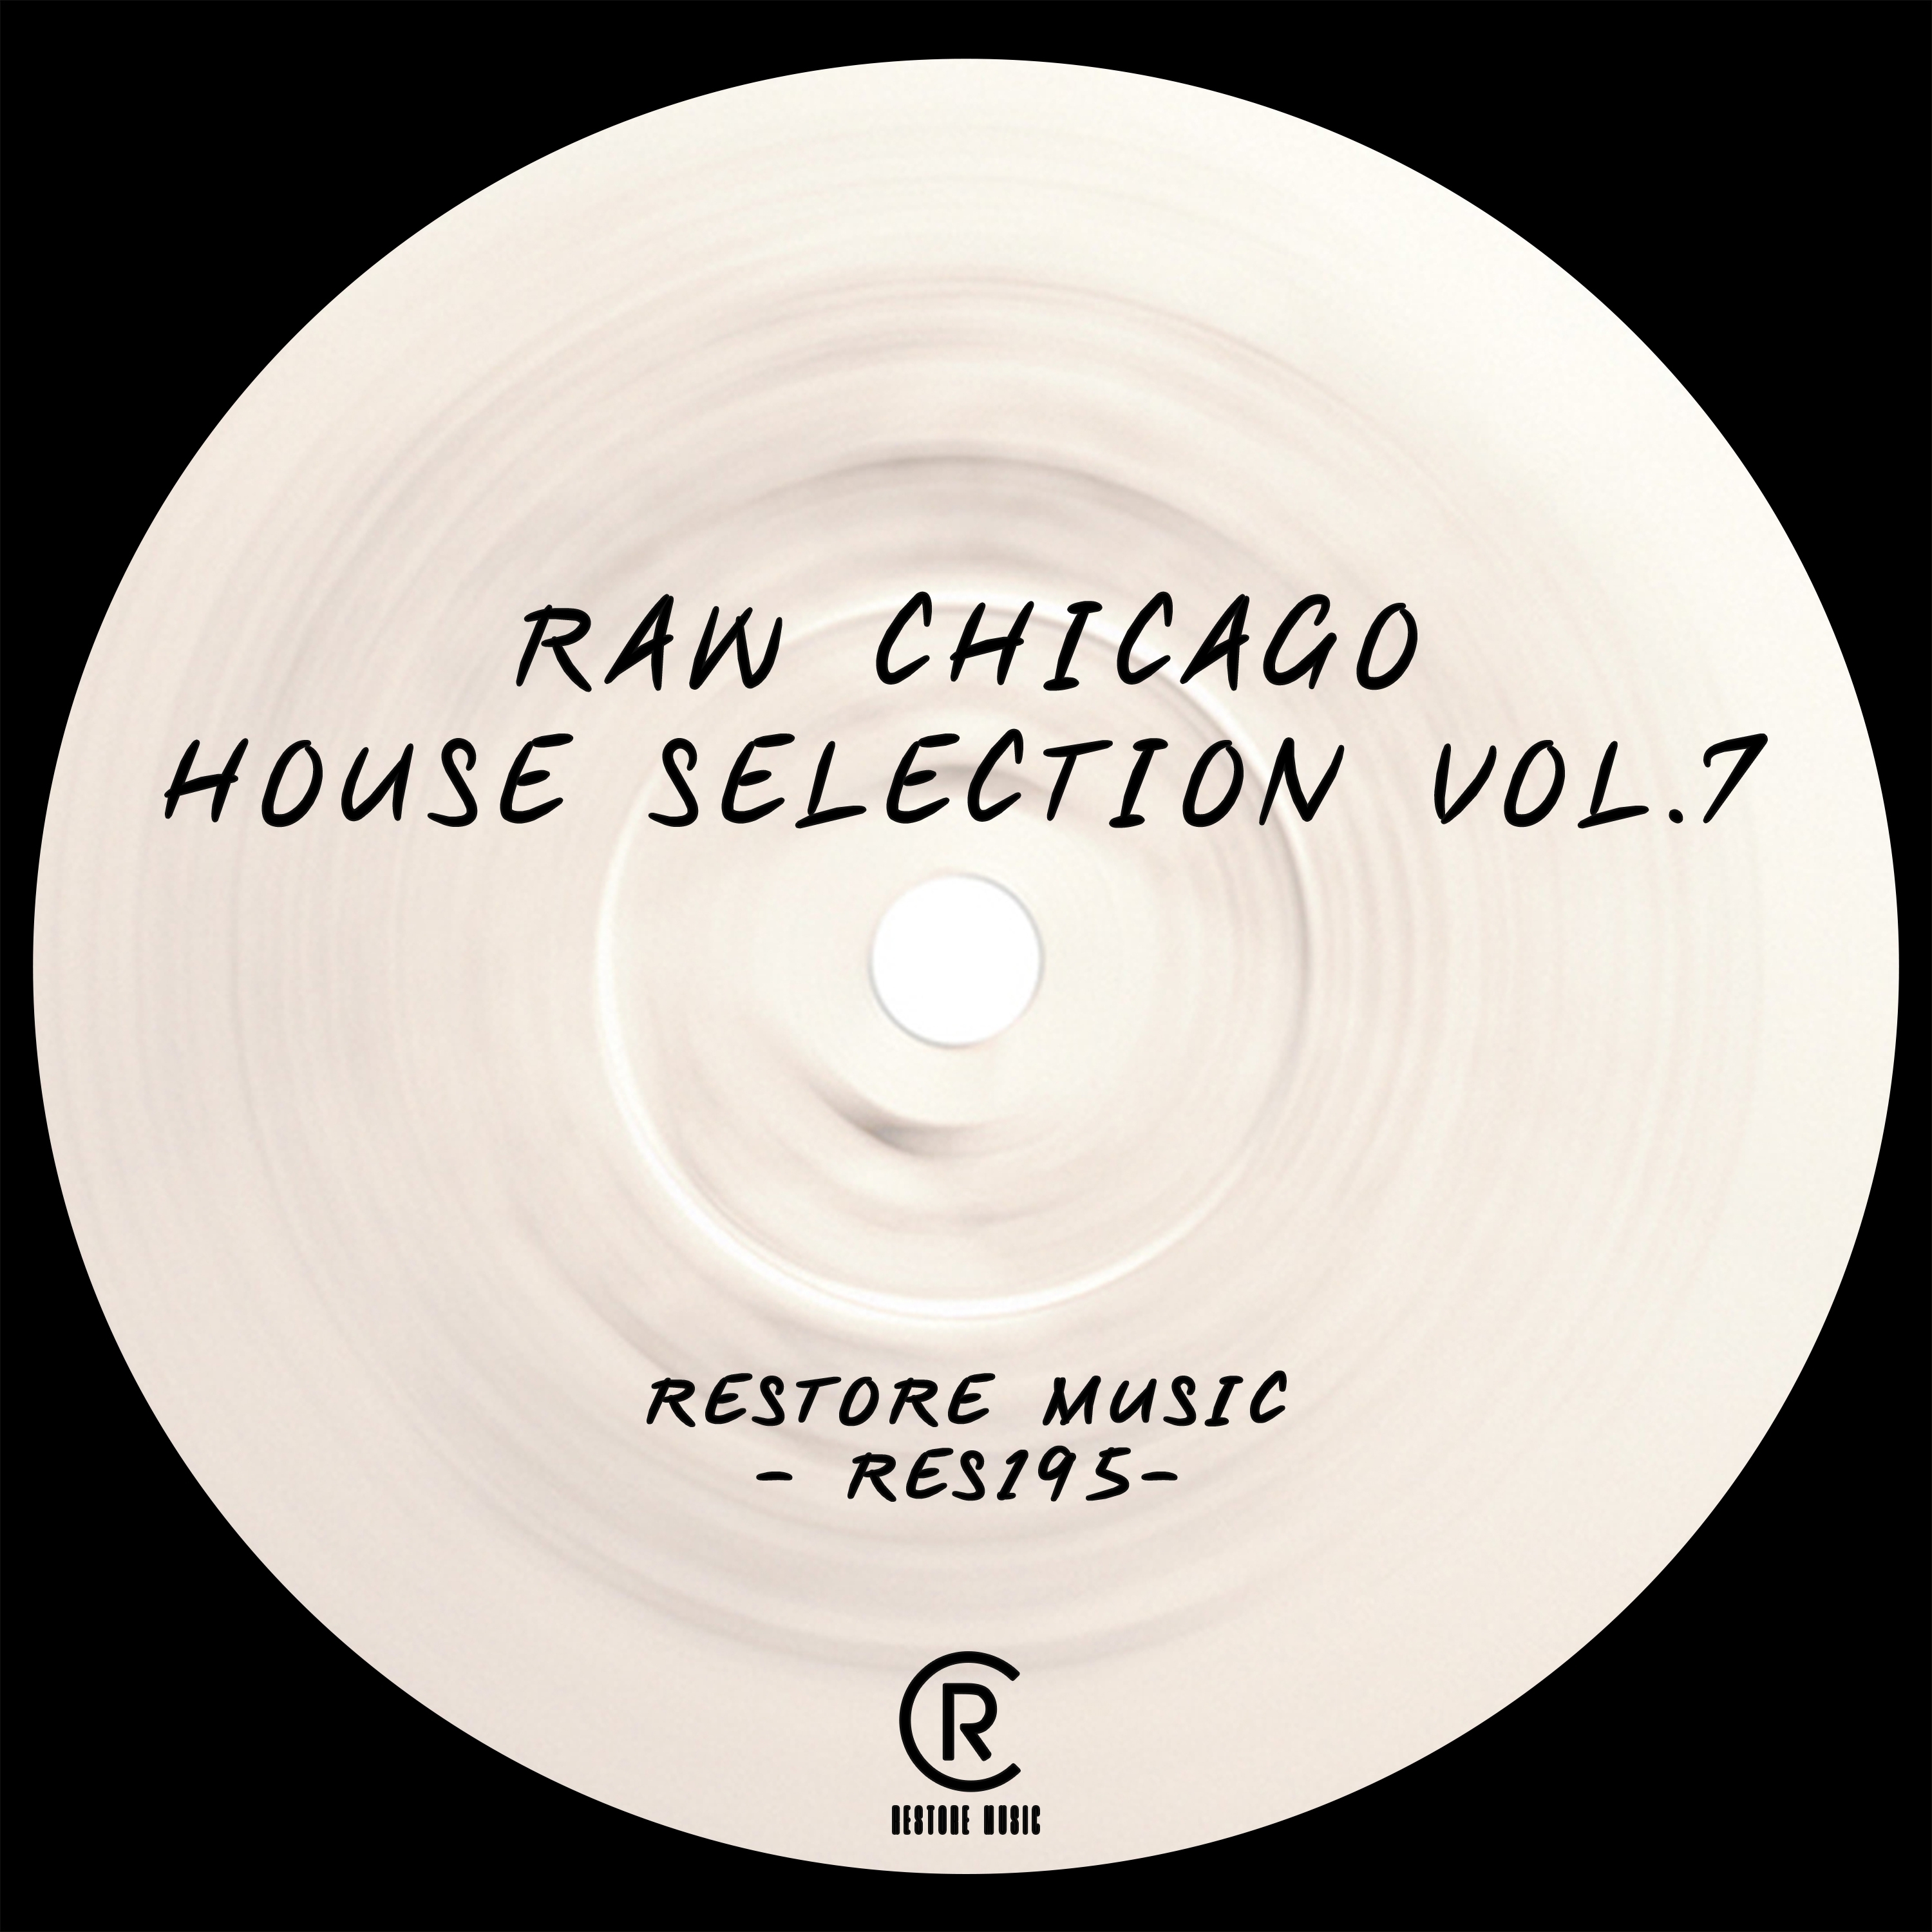 Raw Chicago House Selection, Vol. 7